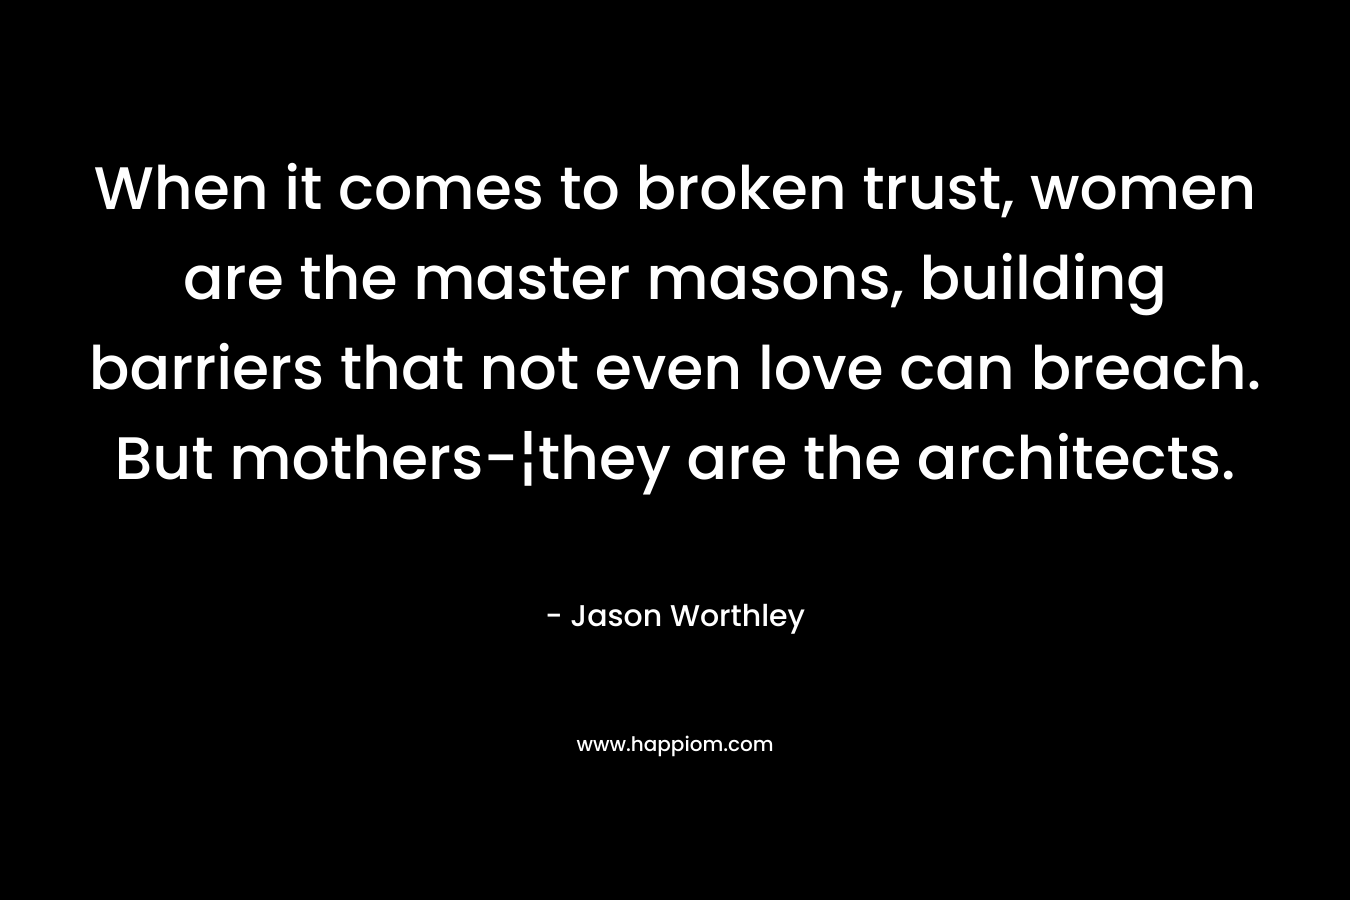 When it comes to broken trust, women are the master masons, building barriers that not even love can breach. But mothers-¦they are the architects. – Jason Worthley